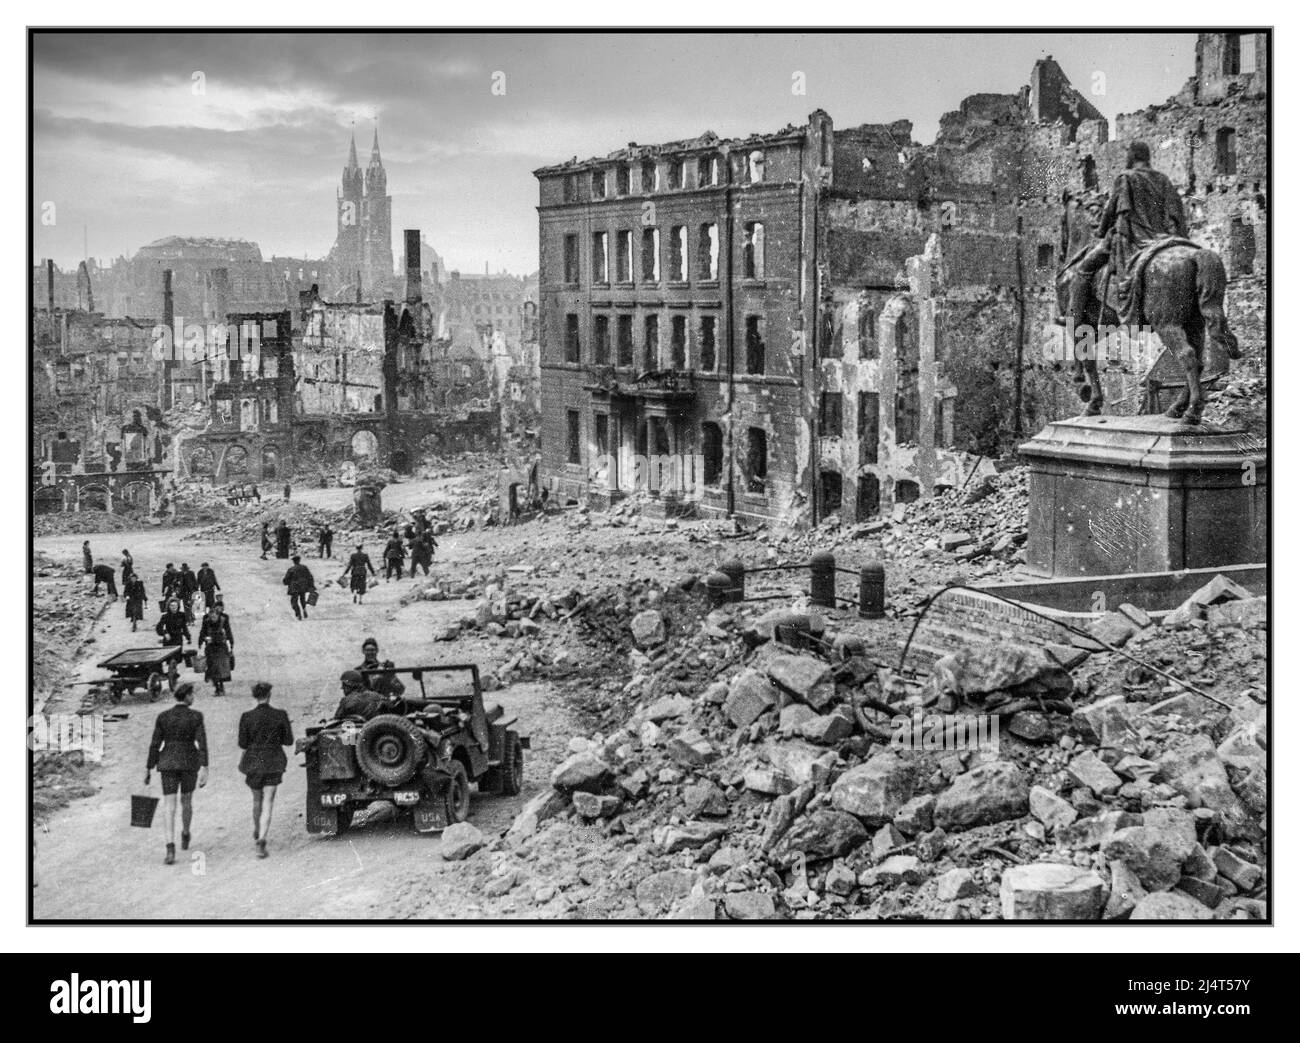 NUREMBERG Allied Bomb damage at end of WW2 Nazi Germany General view of Bavarian city of Nuremberg with civilians fetching food and water, following the cessation of organized resistance. In the distance, the twin-spired Lorenz Church; on the right and surrounded with rubble is a statue of Kaiser William I 1945 World War II VE Day + Stock Photo